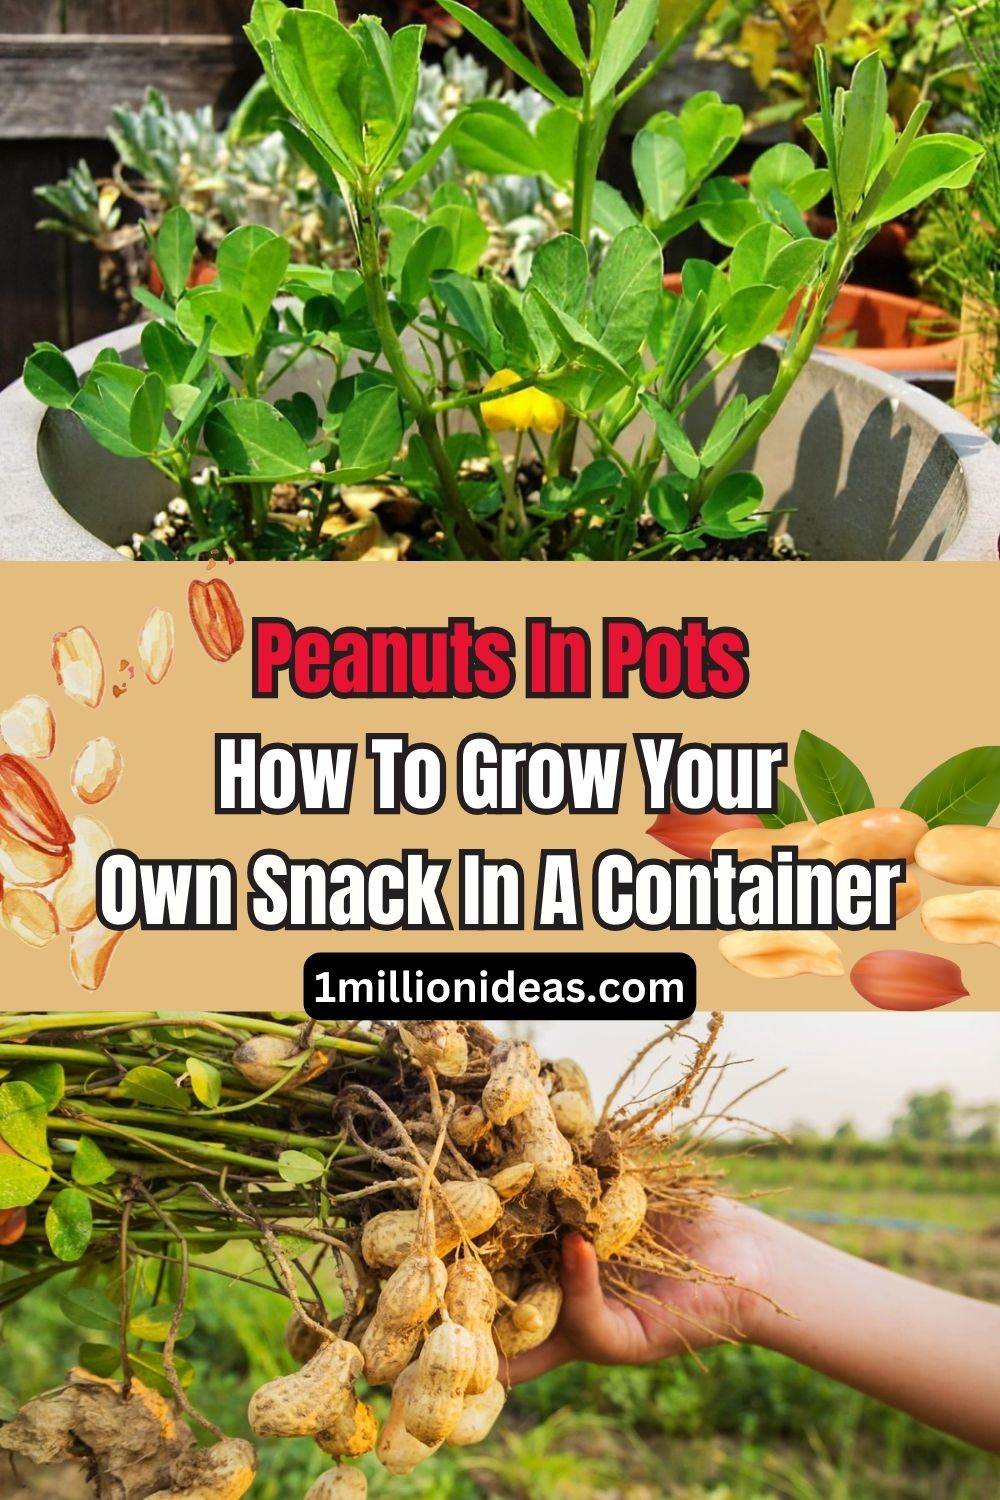 Peanuts In Pots: How To Grow Your Own Snack In A Container - 53